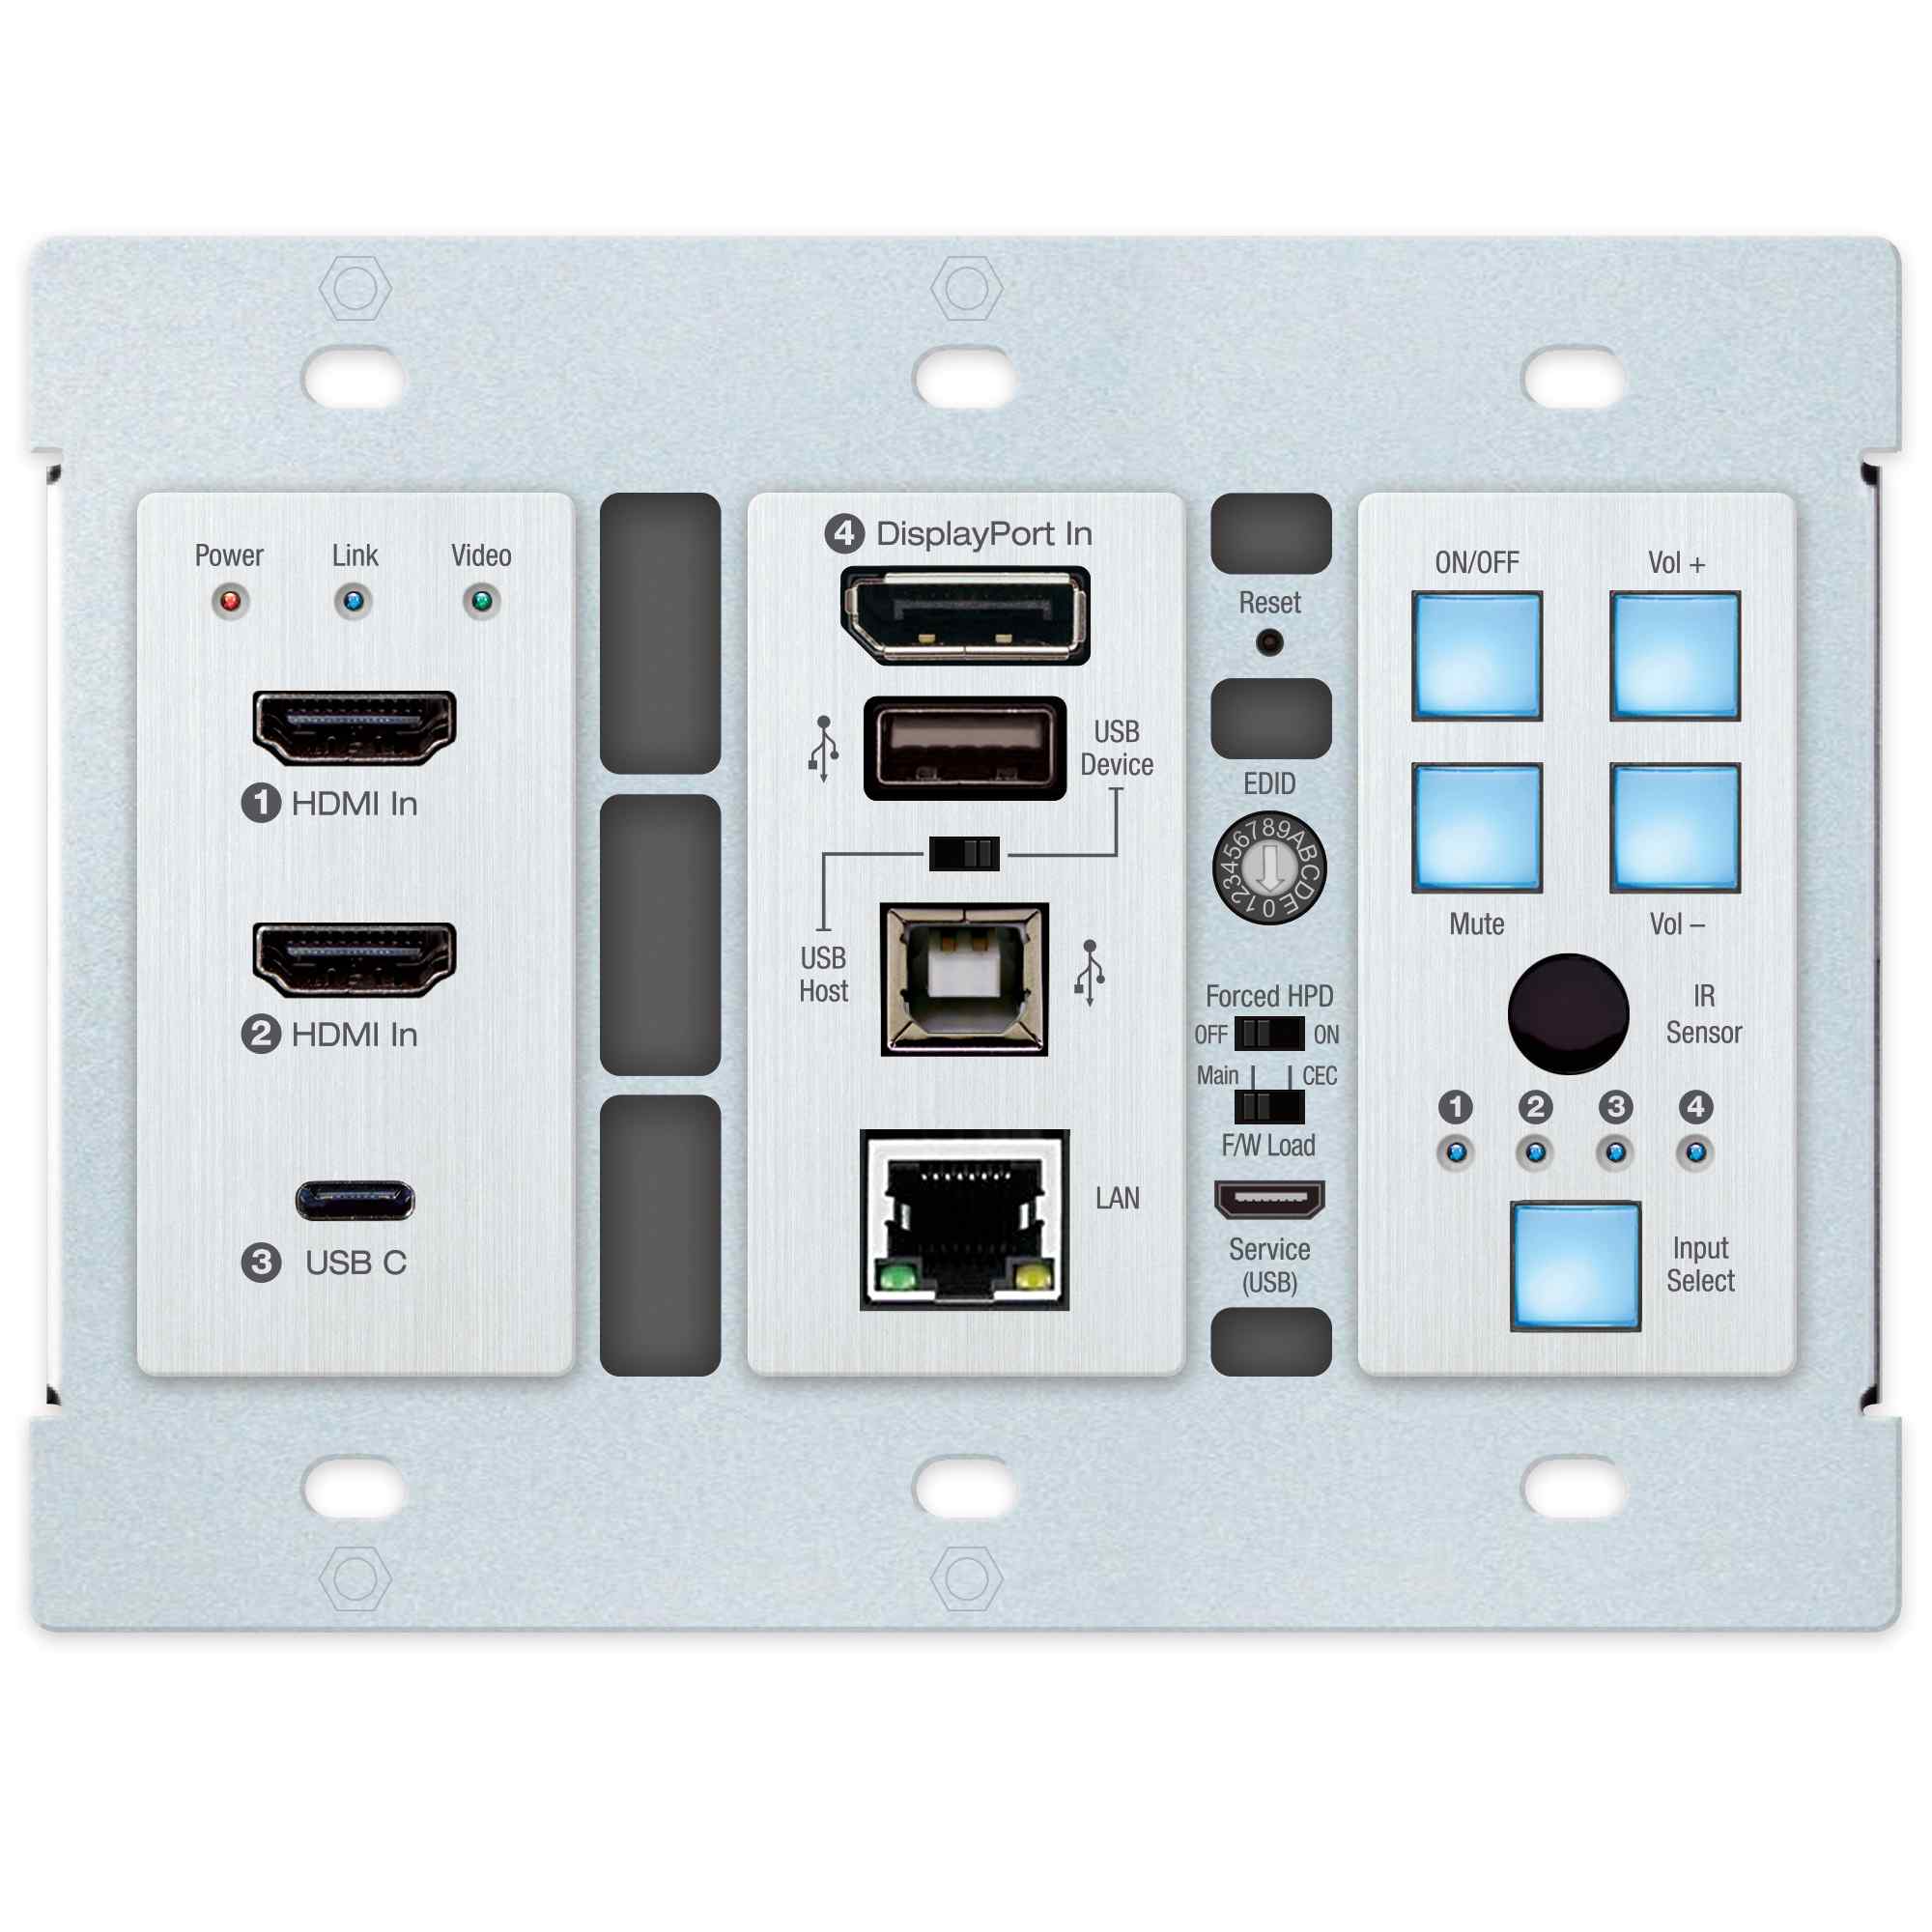 Thumbnail of usb wall plate front chassis